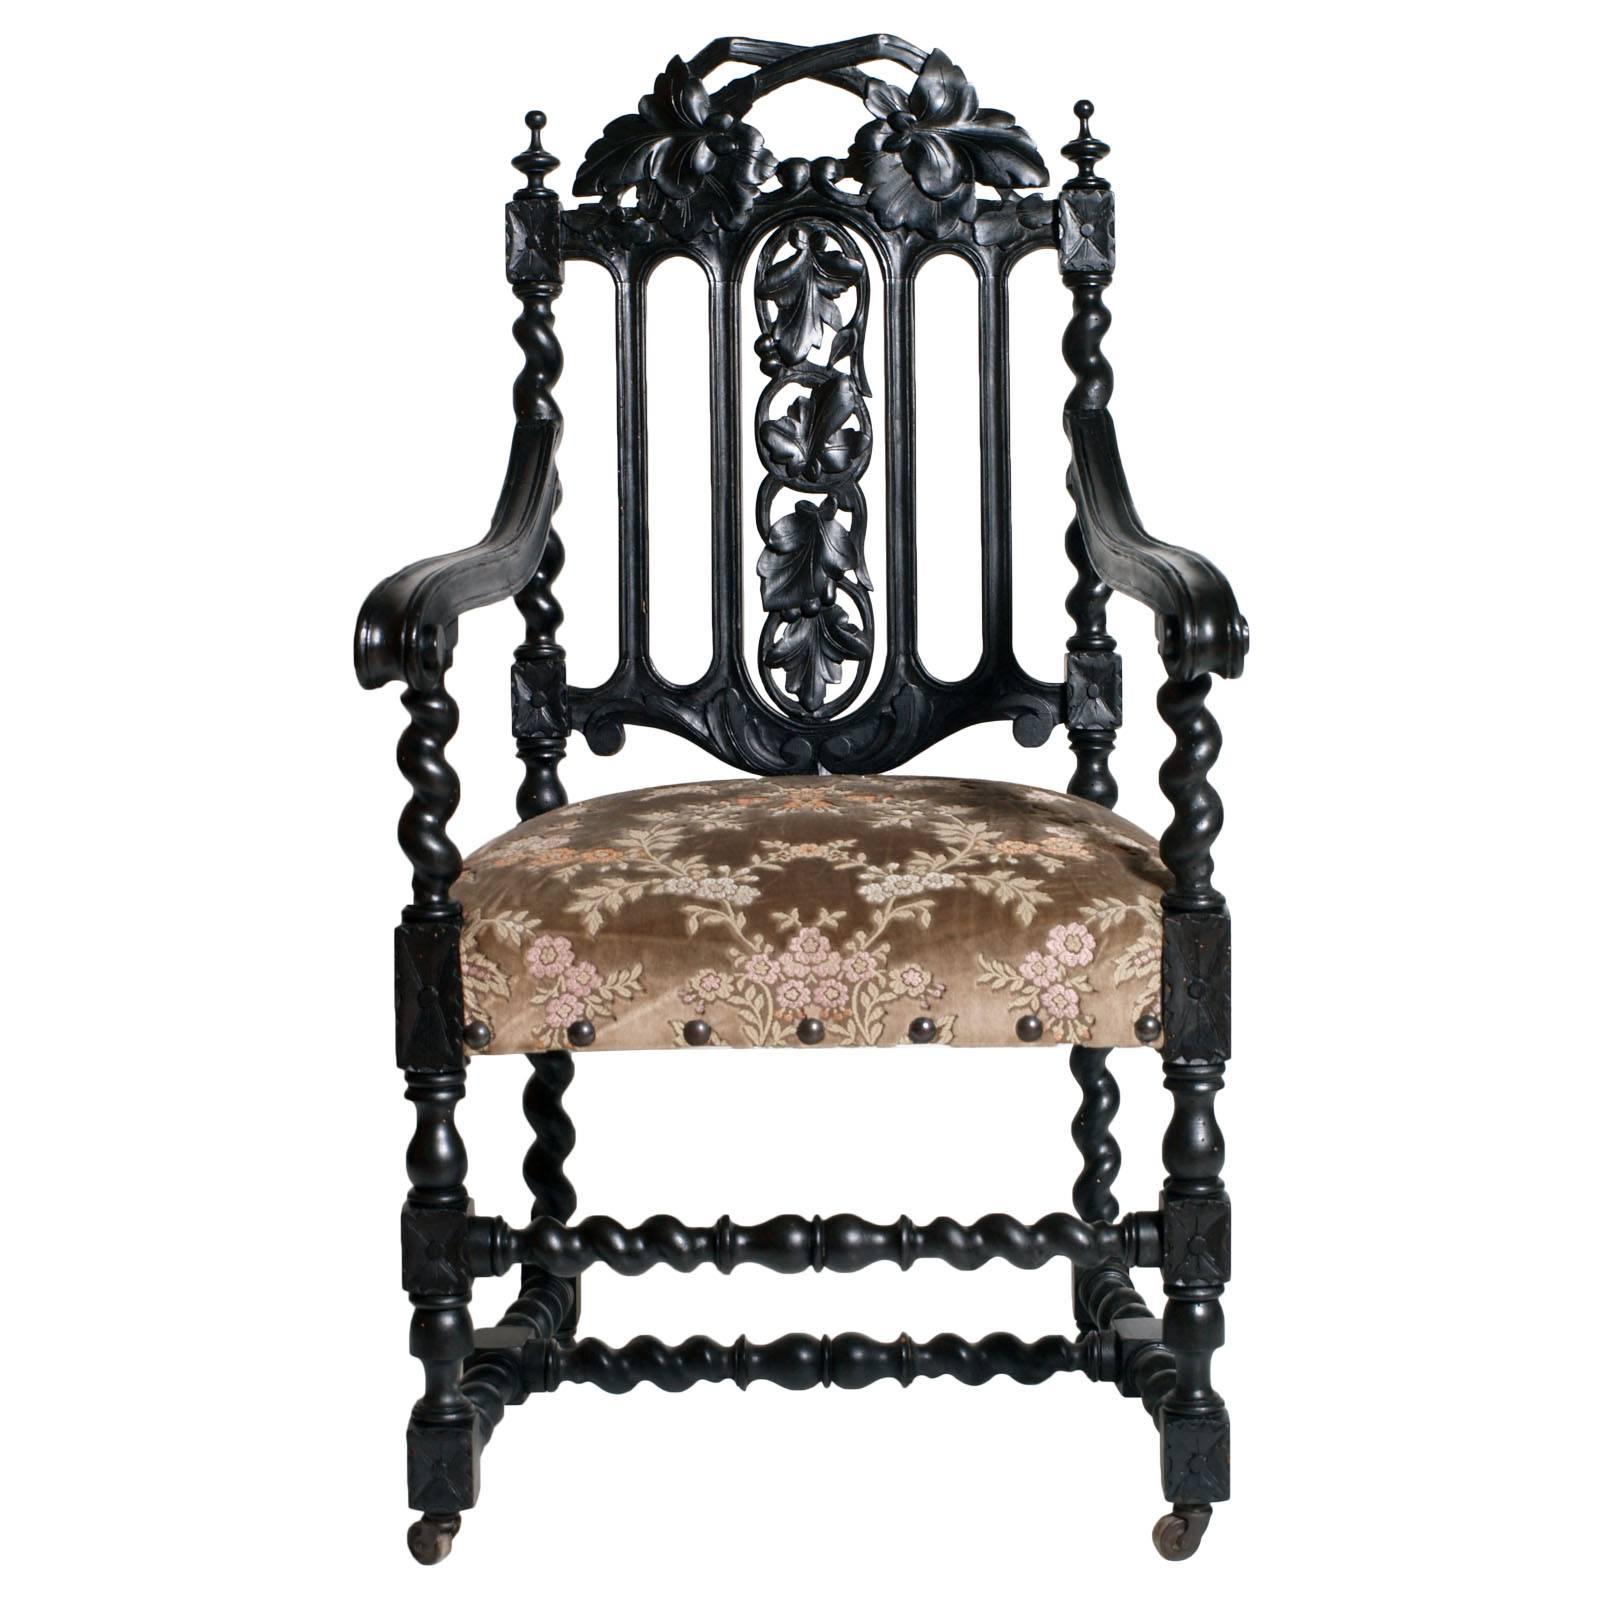 Important ebonized Baroque Venetian  armchair, circa 1780 Fratelli Mora.
Produced by Fratelli Mora in Bergamo, factory established in 1778. At that time the main production was made by the Venetian aristocracy Bergamo being an important city of the